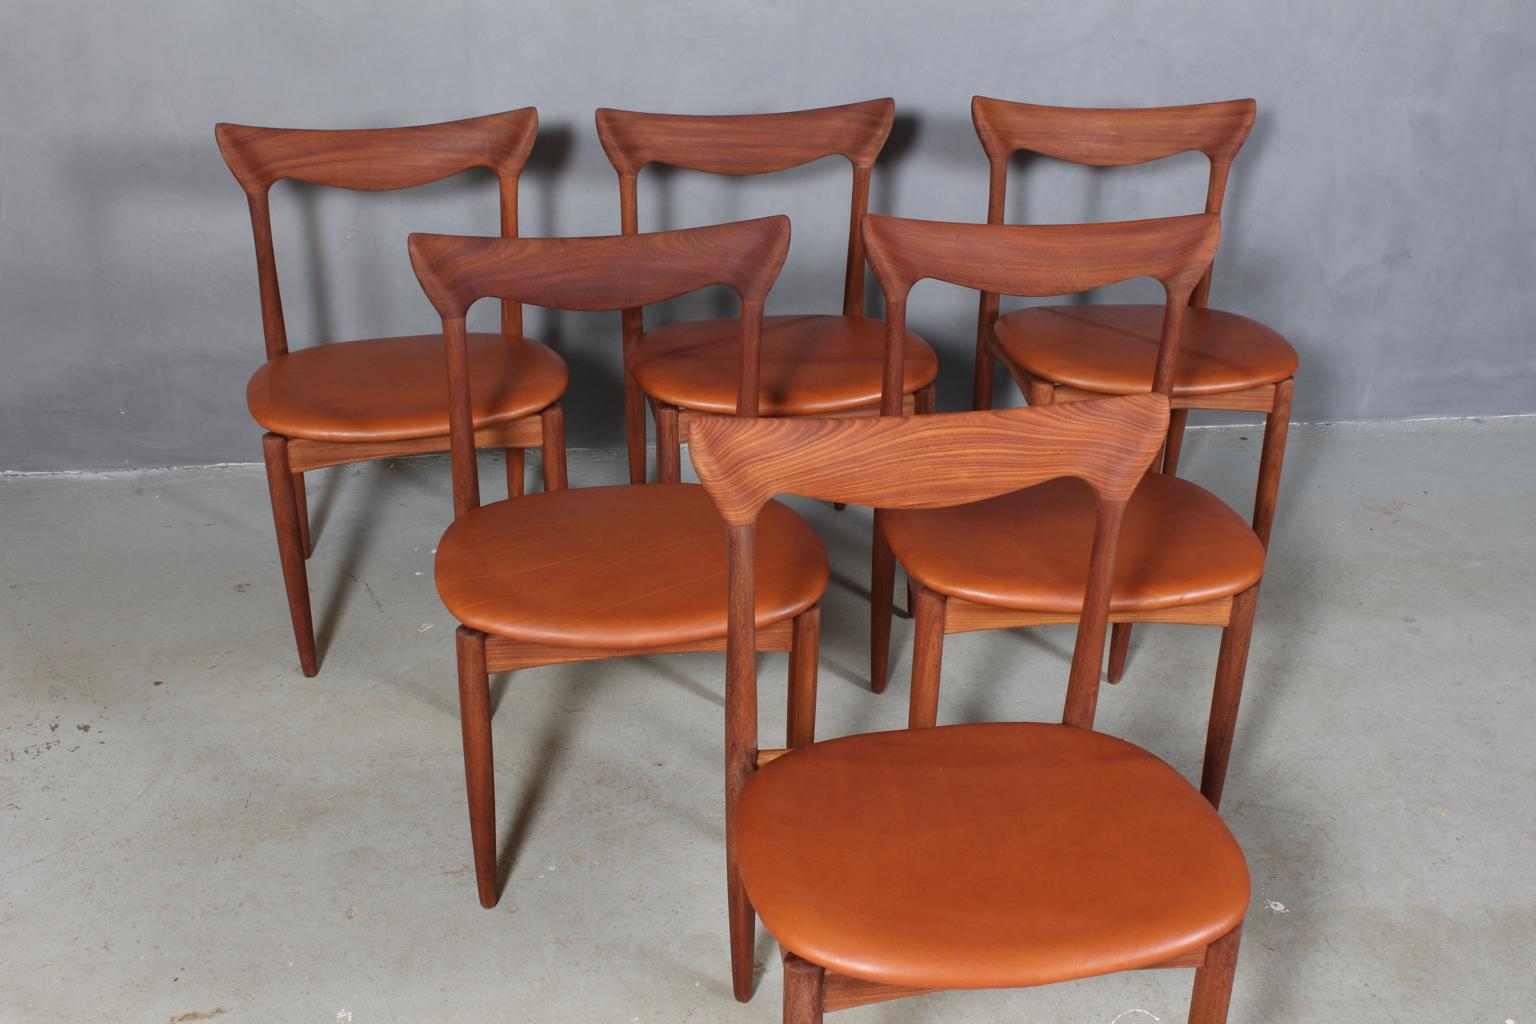 Henry Walter Klein six dining chairs in massive teak.

New upholstered with cognac aniline leather.

Made by Bramin, 1960s.